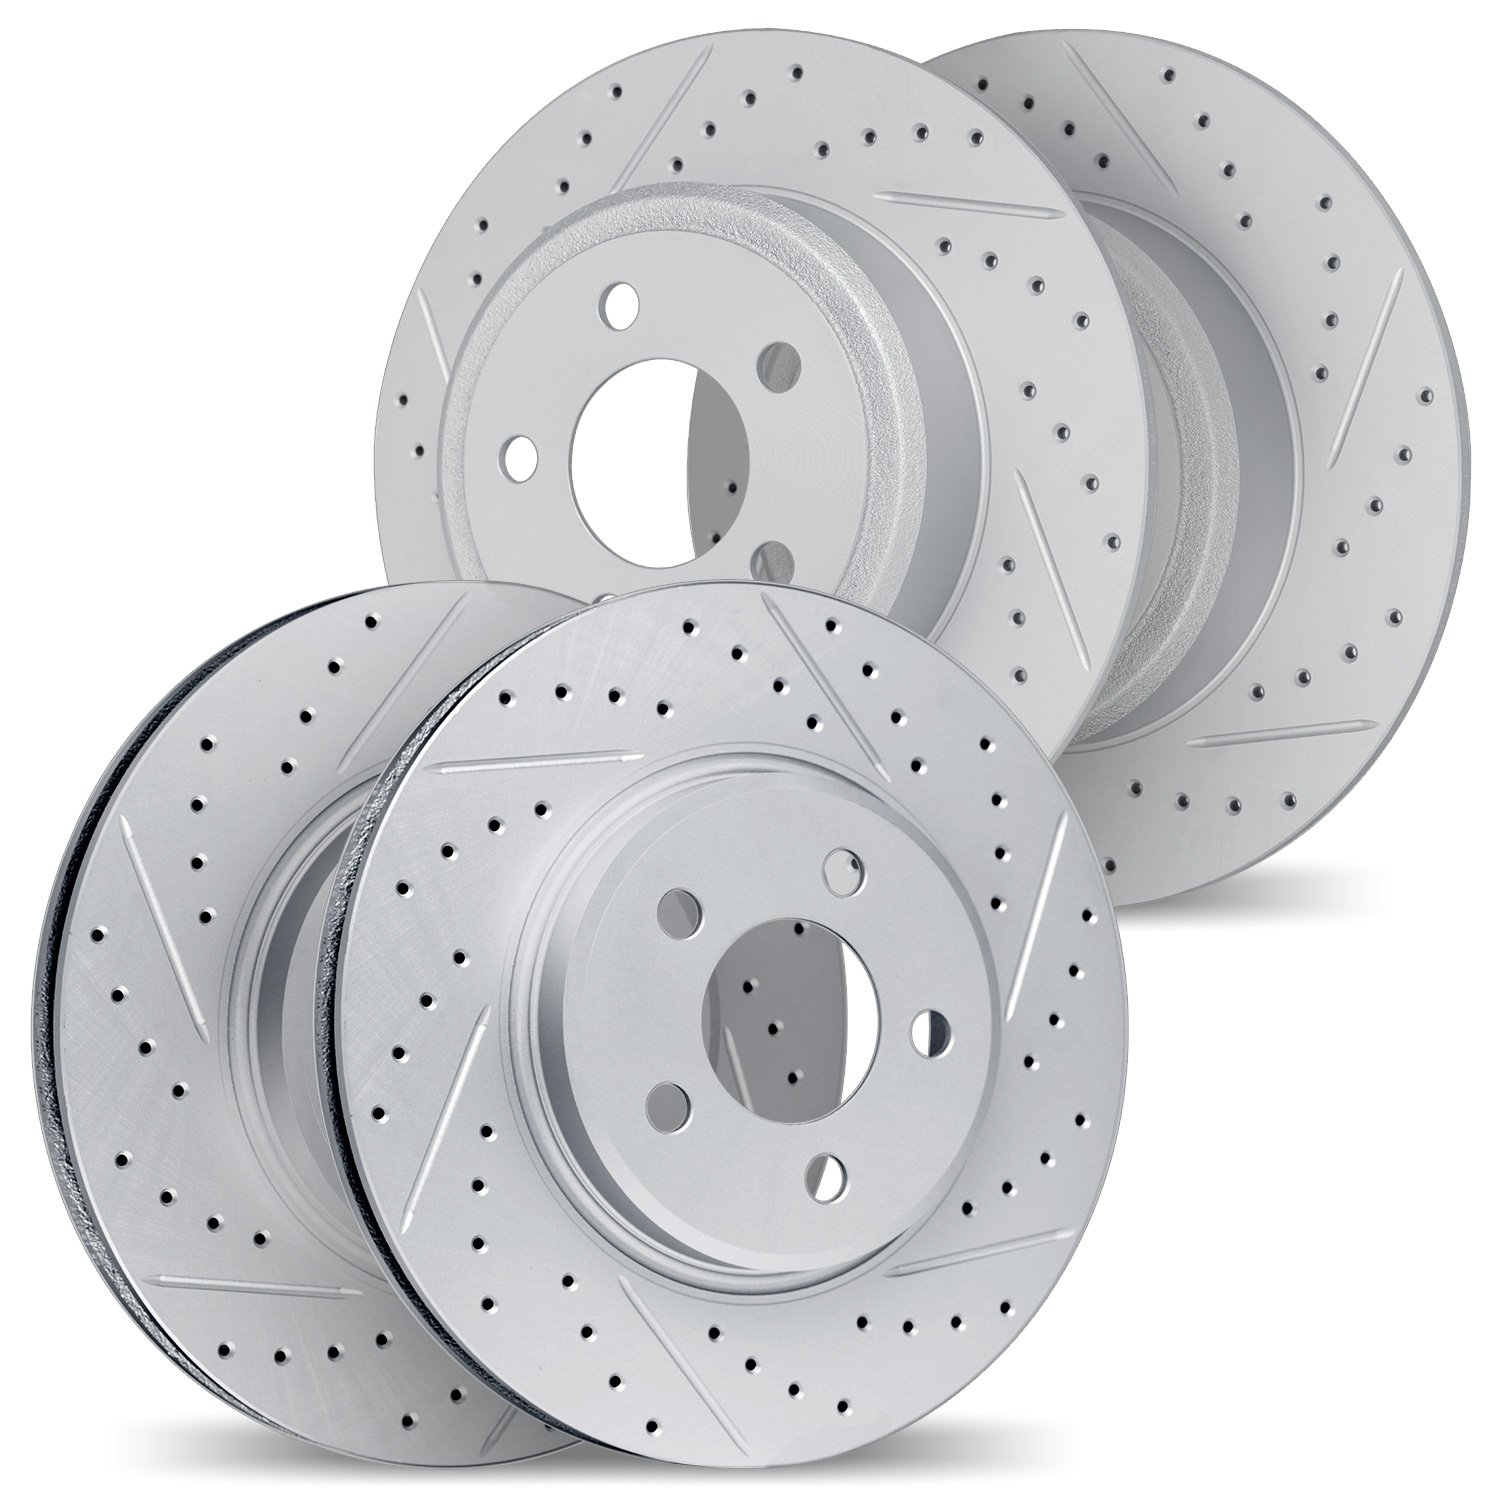 2004-40019 Geoperformance Drilled/Slotted Brake Rotors, 2012-2020 Multiple Makes/Models, Position: Front and Rear